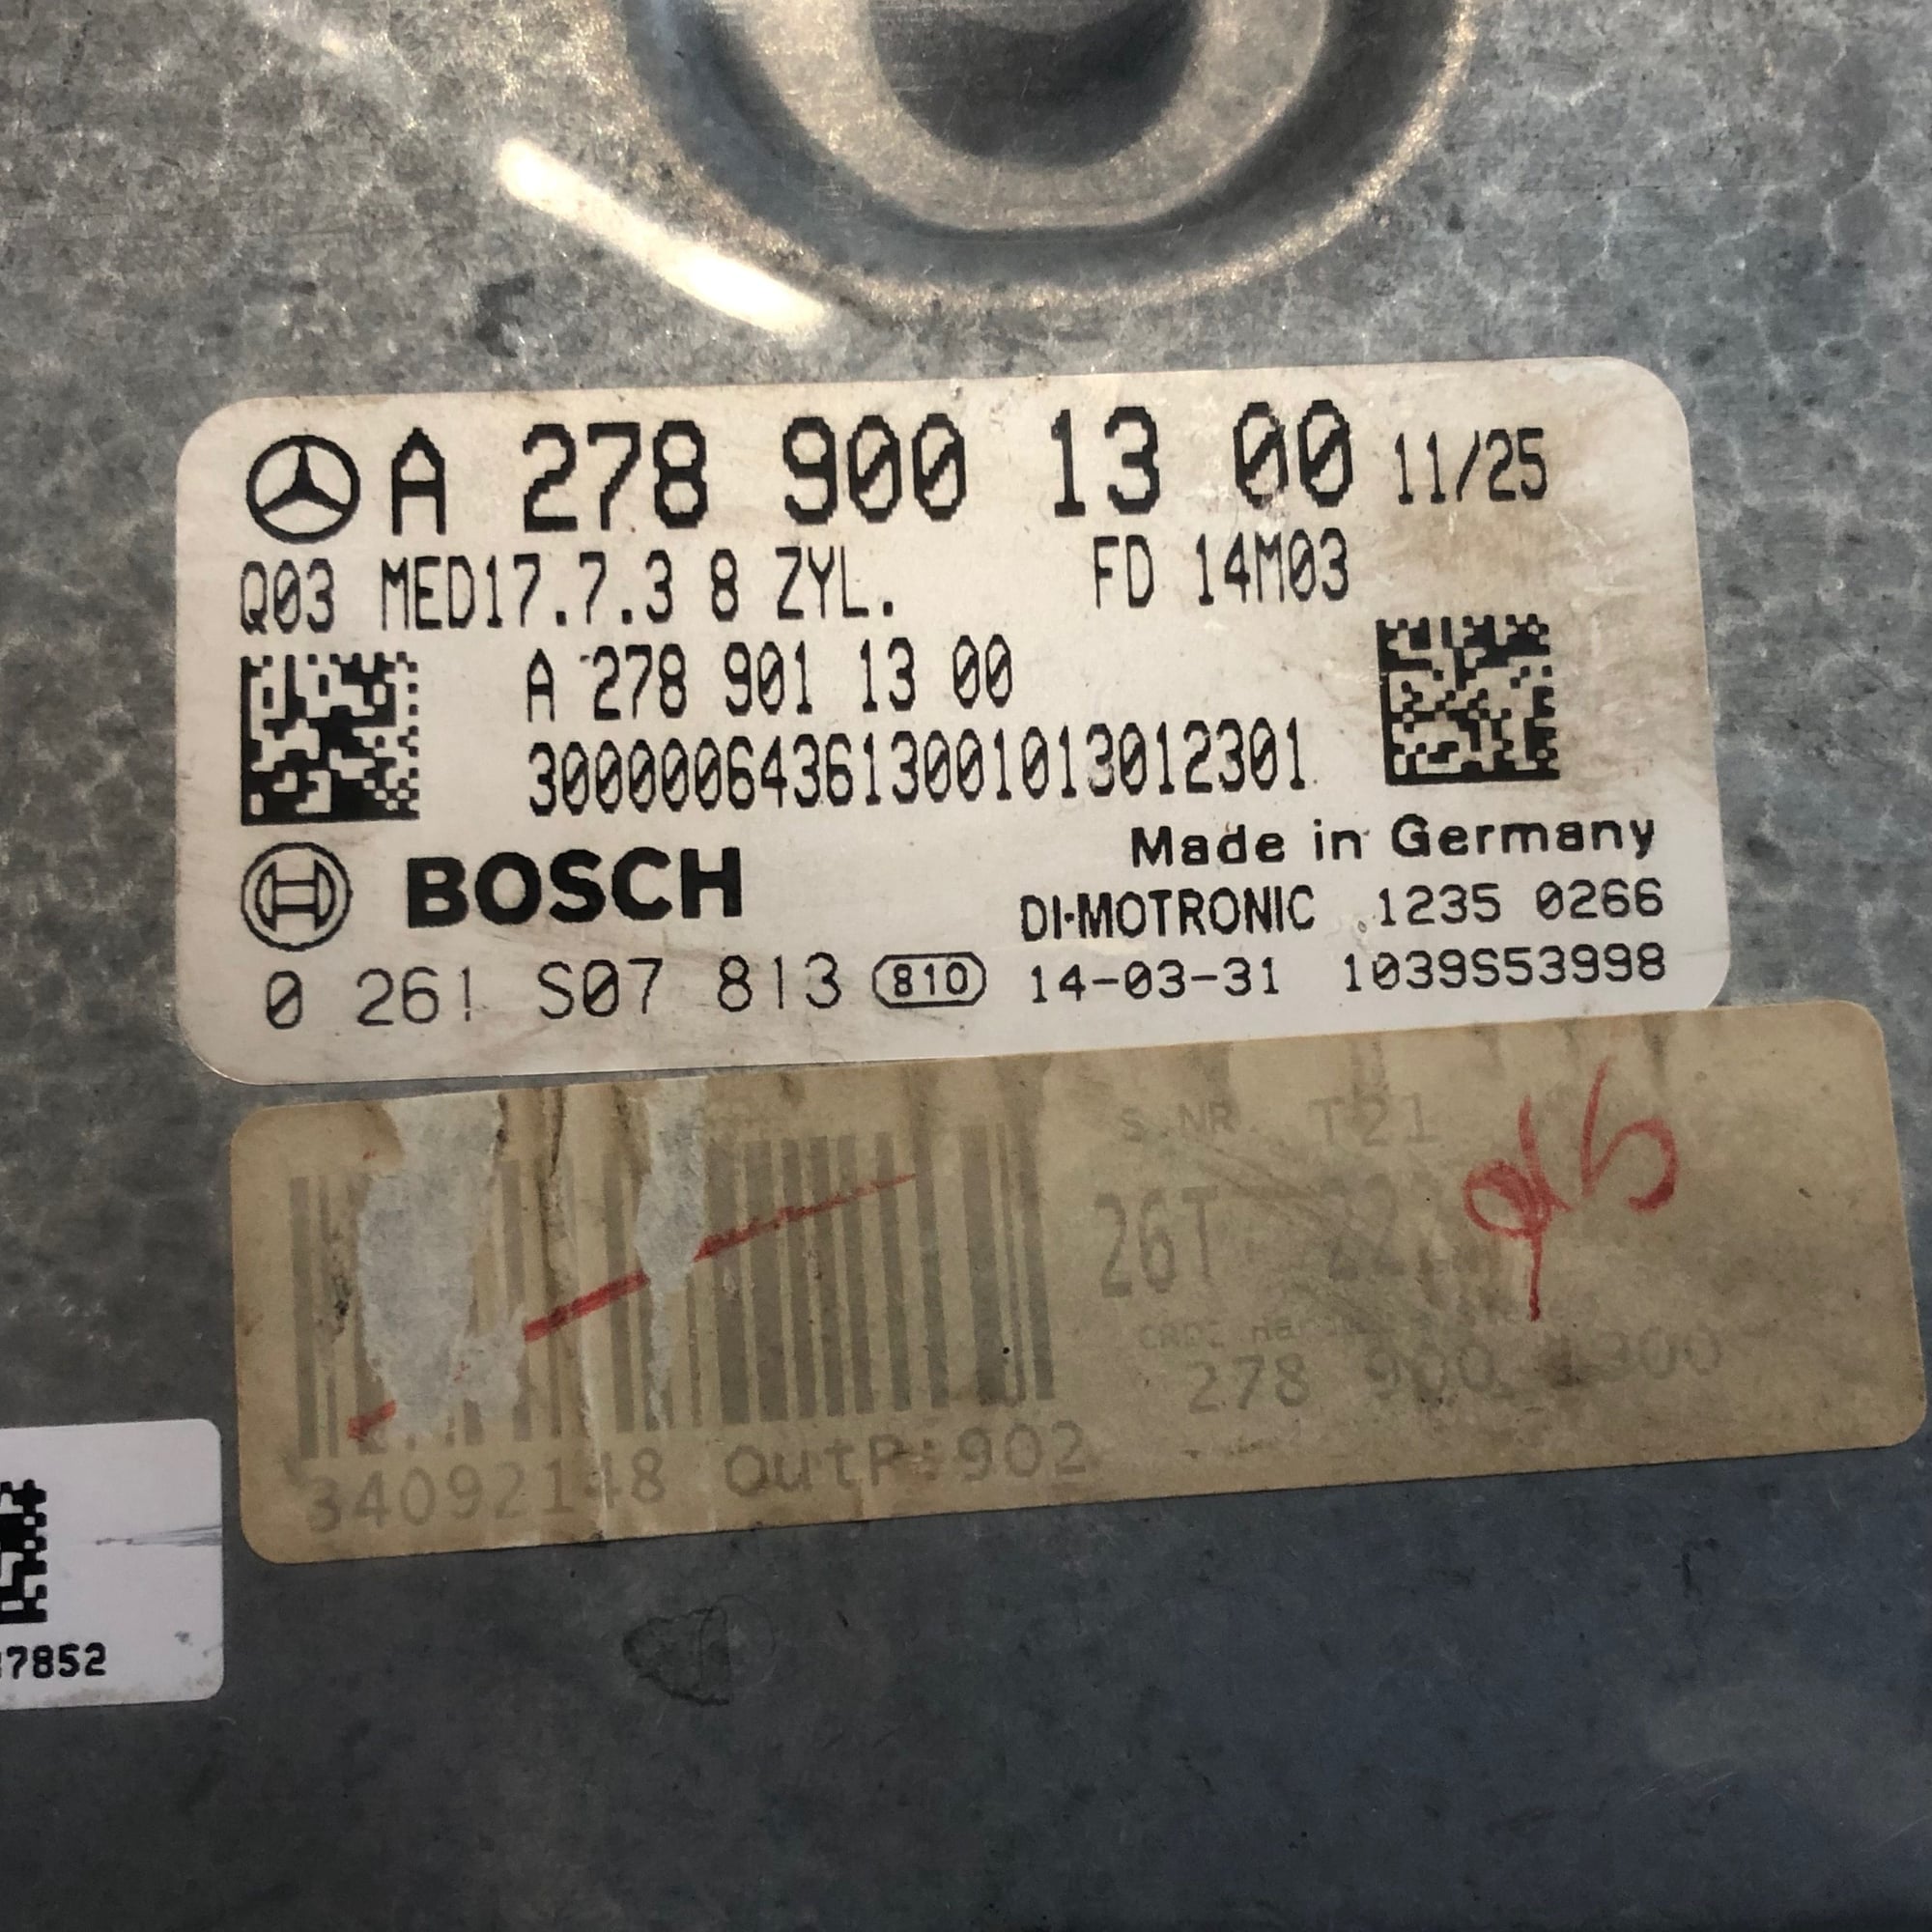 Engine - Electrical - Mercedes Benz ECU OEM A 278 900 13 00 MED17.7.3 - Used - Peoria, IL 61615, United States